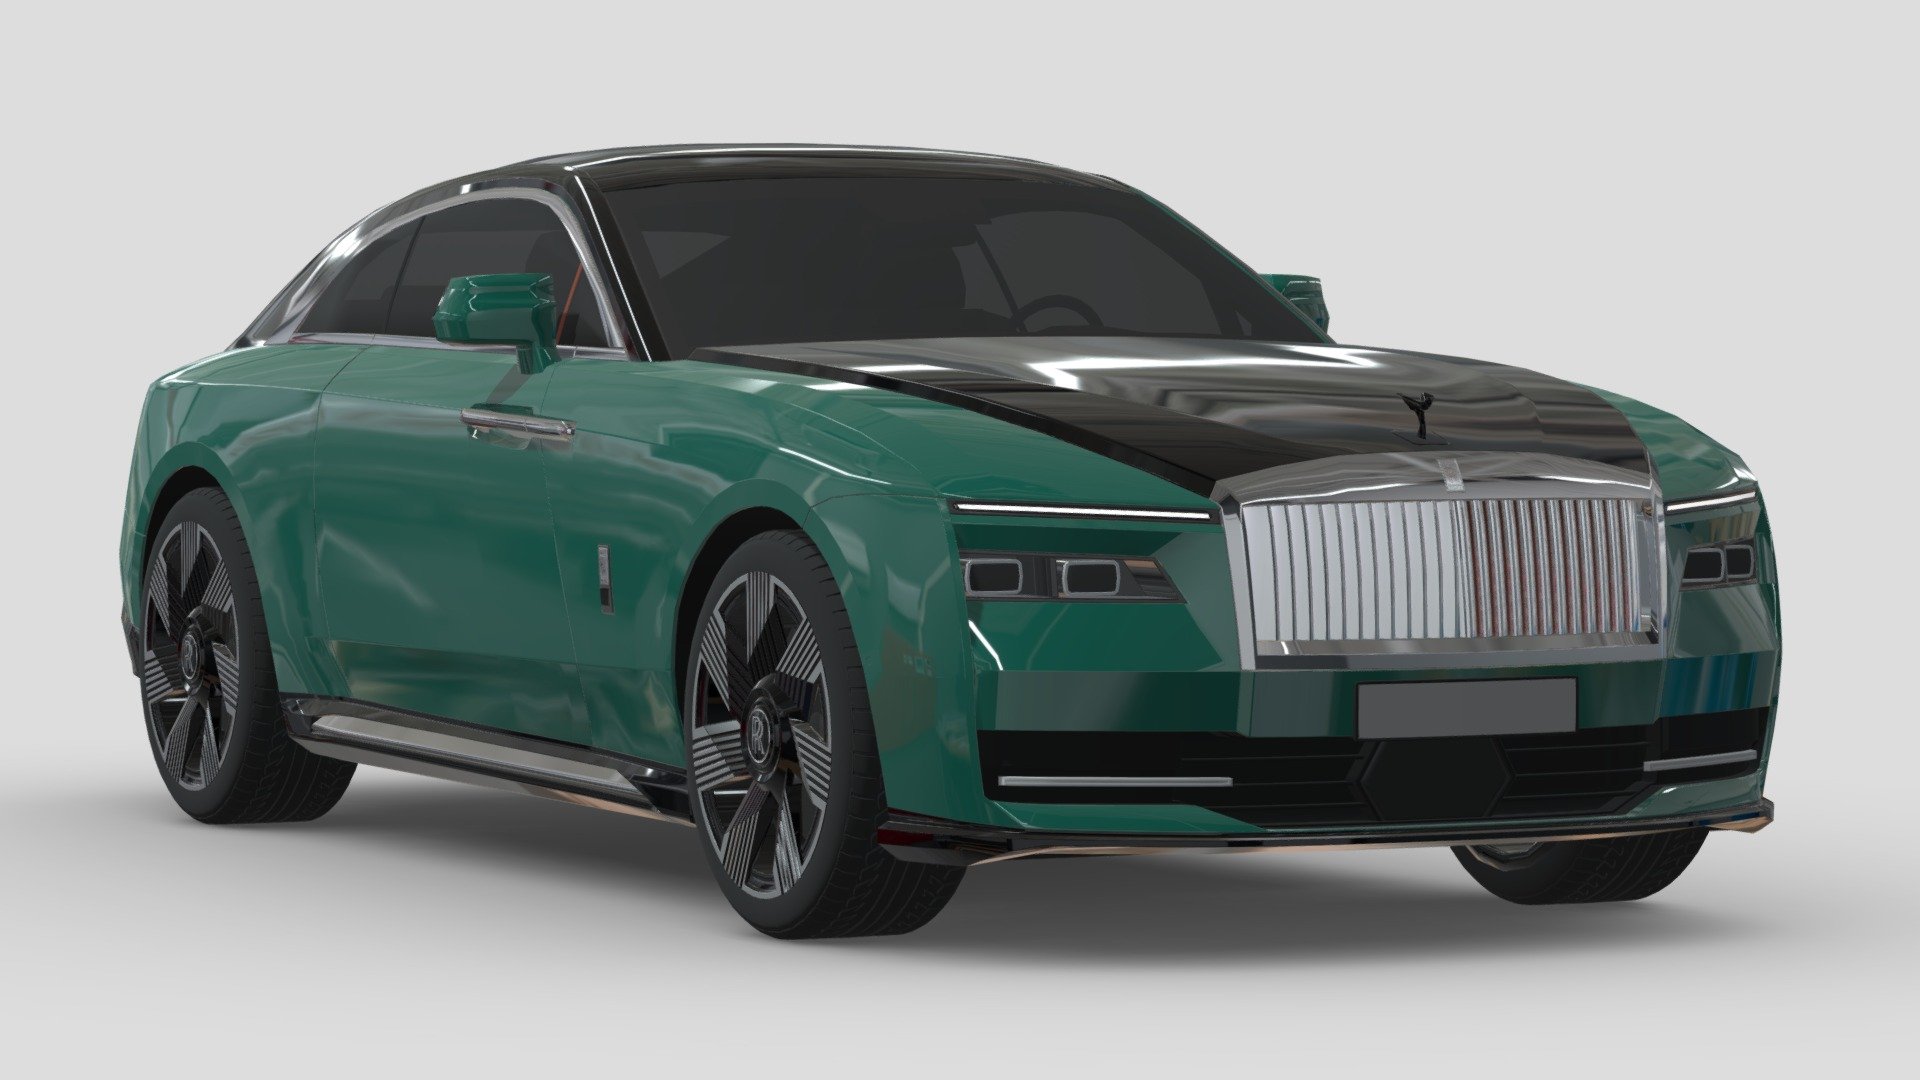 Introducing the Rolls Royce Spectre, meticulously crafted to epitomize elegance and luxury in every detail. As a seasoned 3D artist with years of experience specializing in automotive design, I've honed my skills in creating a plethora of stunning car models. 

This 3D model of the Rolls Royce Spectre is a masterpiece of craftsmanship, meticulously sculpted to capture every curve and contour of this iconic vehicle. Every aspect has been faithfully recreated with precision and attention to detail.

What sets my models apart is not just their realism, but also their accessibility. Despite the high quality of my work, I believe in offering affordable options for enthusiasts and professionals alike. With me, you can expect top-notch quality without breaking the bank.

Whether you're a designer looking to visualize your concept, an enthusiast seeking to admire the beauty of the Rolls Royce Spectre, or a developer in need of assets for a virtual project, this 3D model is sure to exceed your expectations 3d model